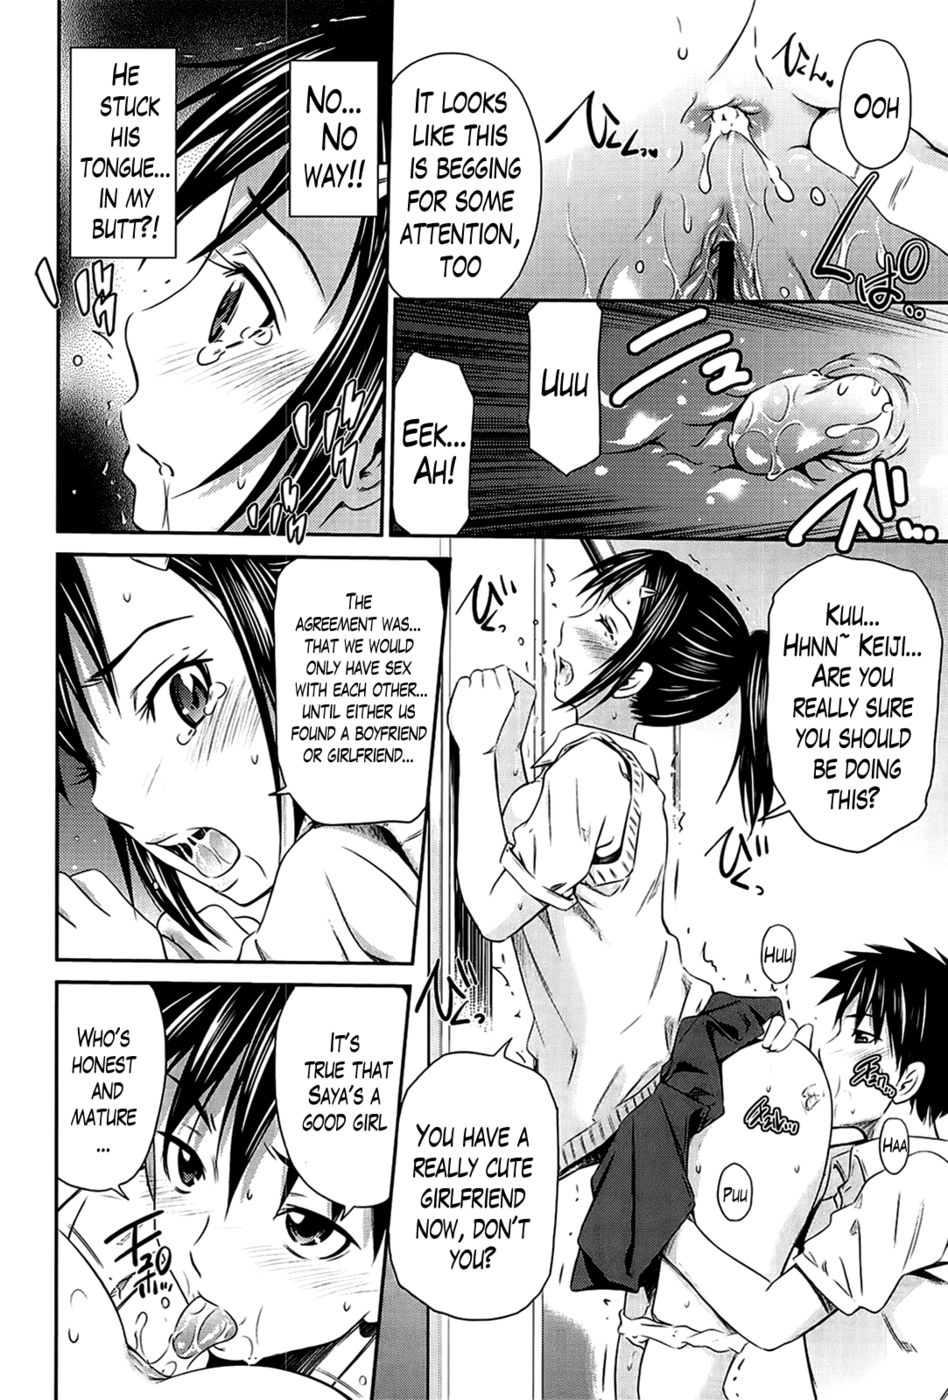 Hentai Manga Comic-A Very Hot Middle-Chapter 5-Substitute GirlFriend-10